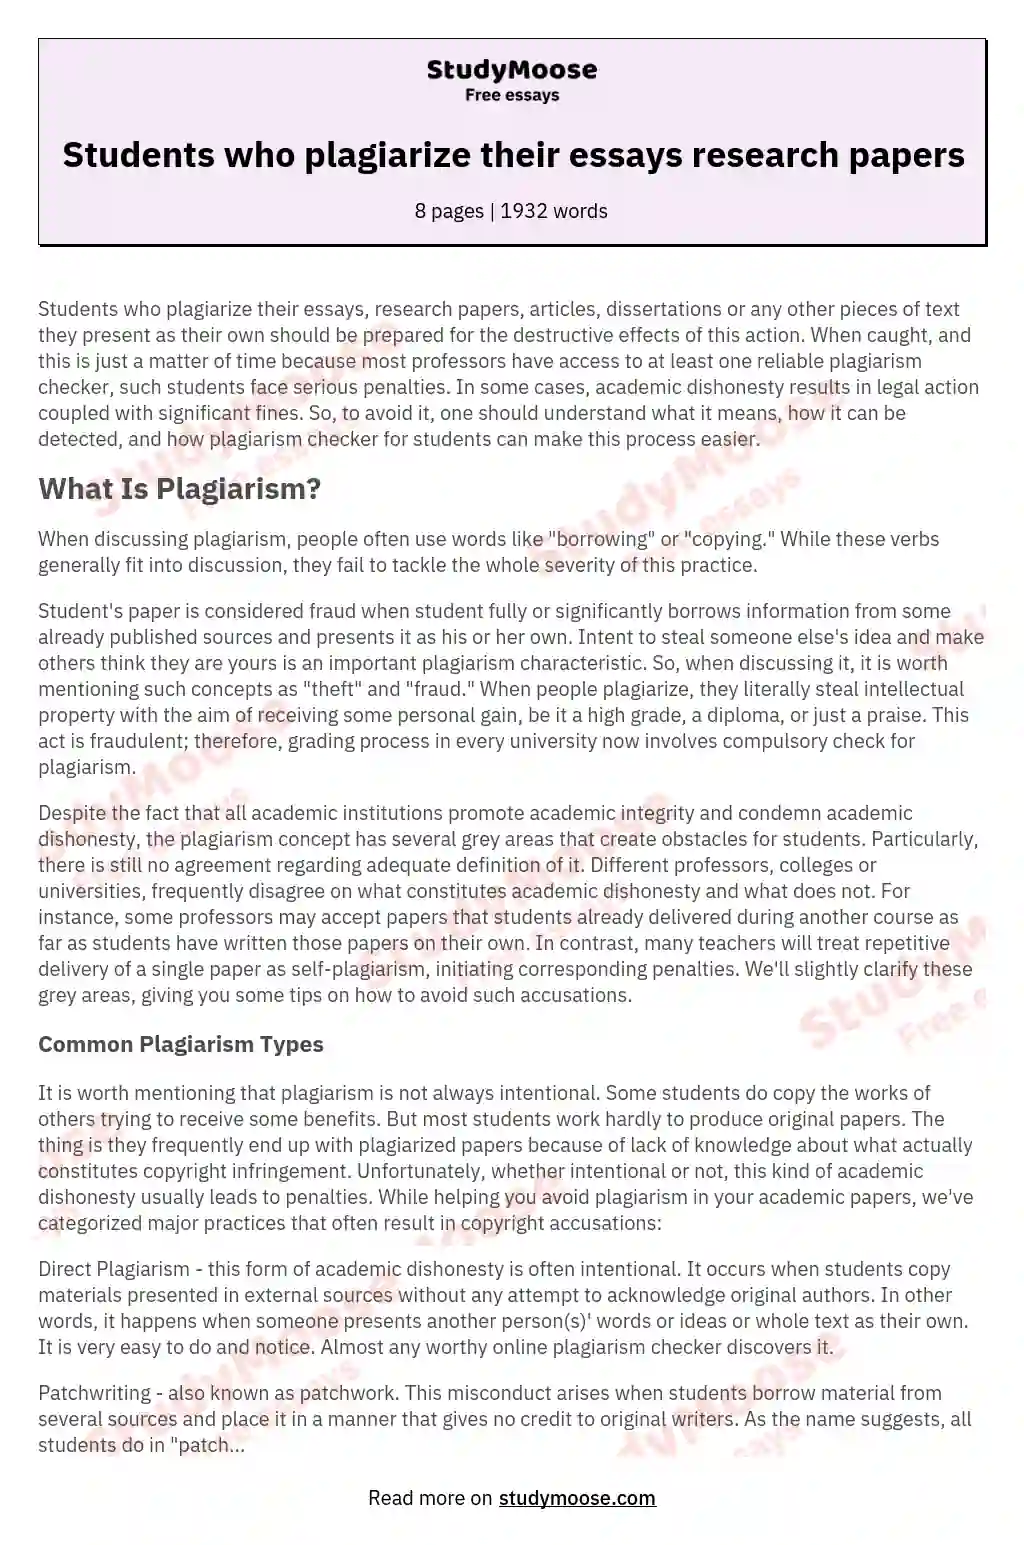 Students who plagiarize their essays research papers essay